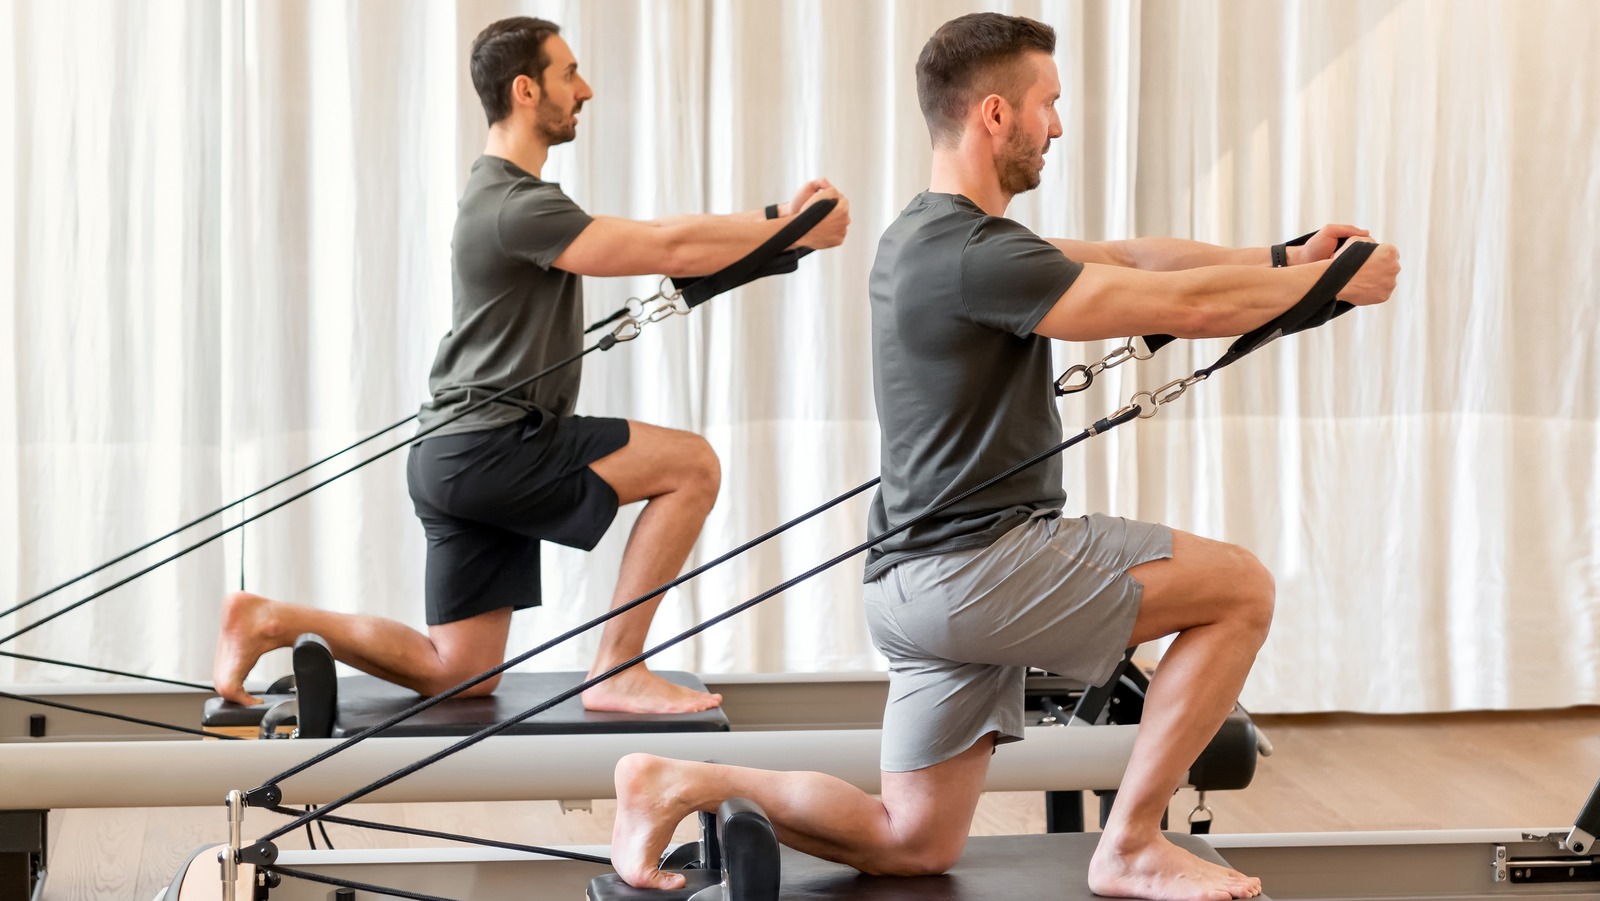 Does Pilates Help For Lower Back Pain?